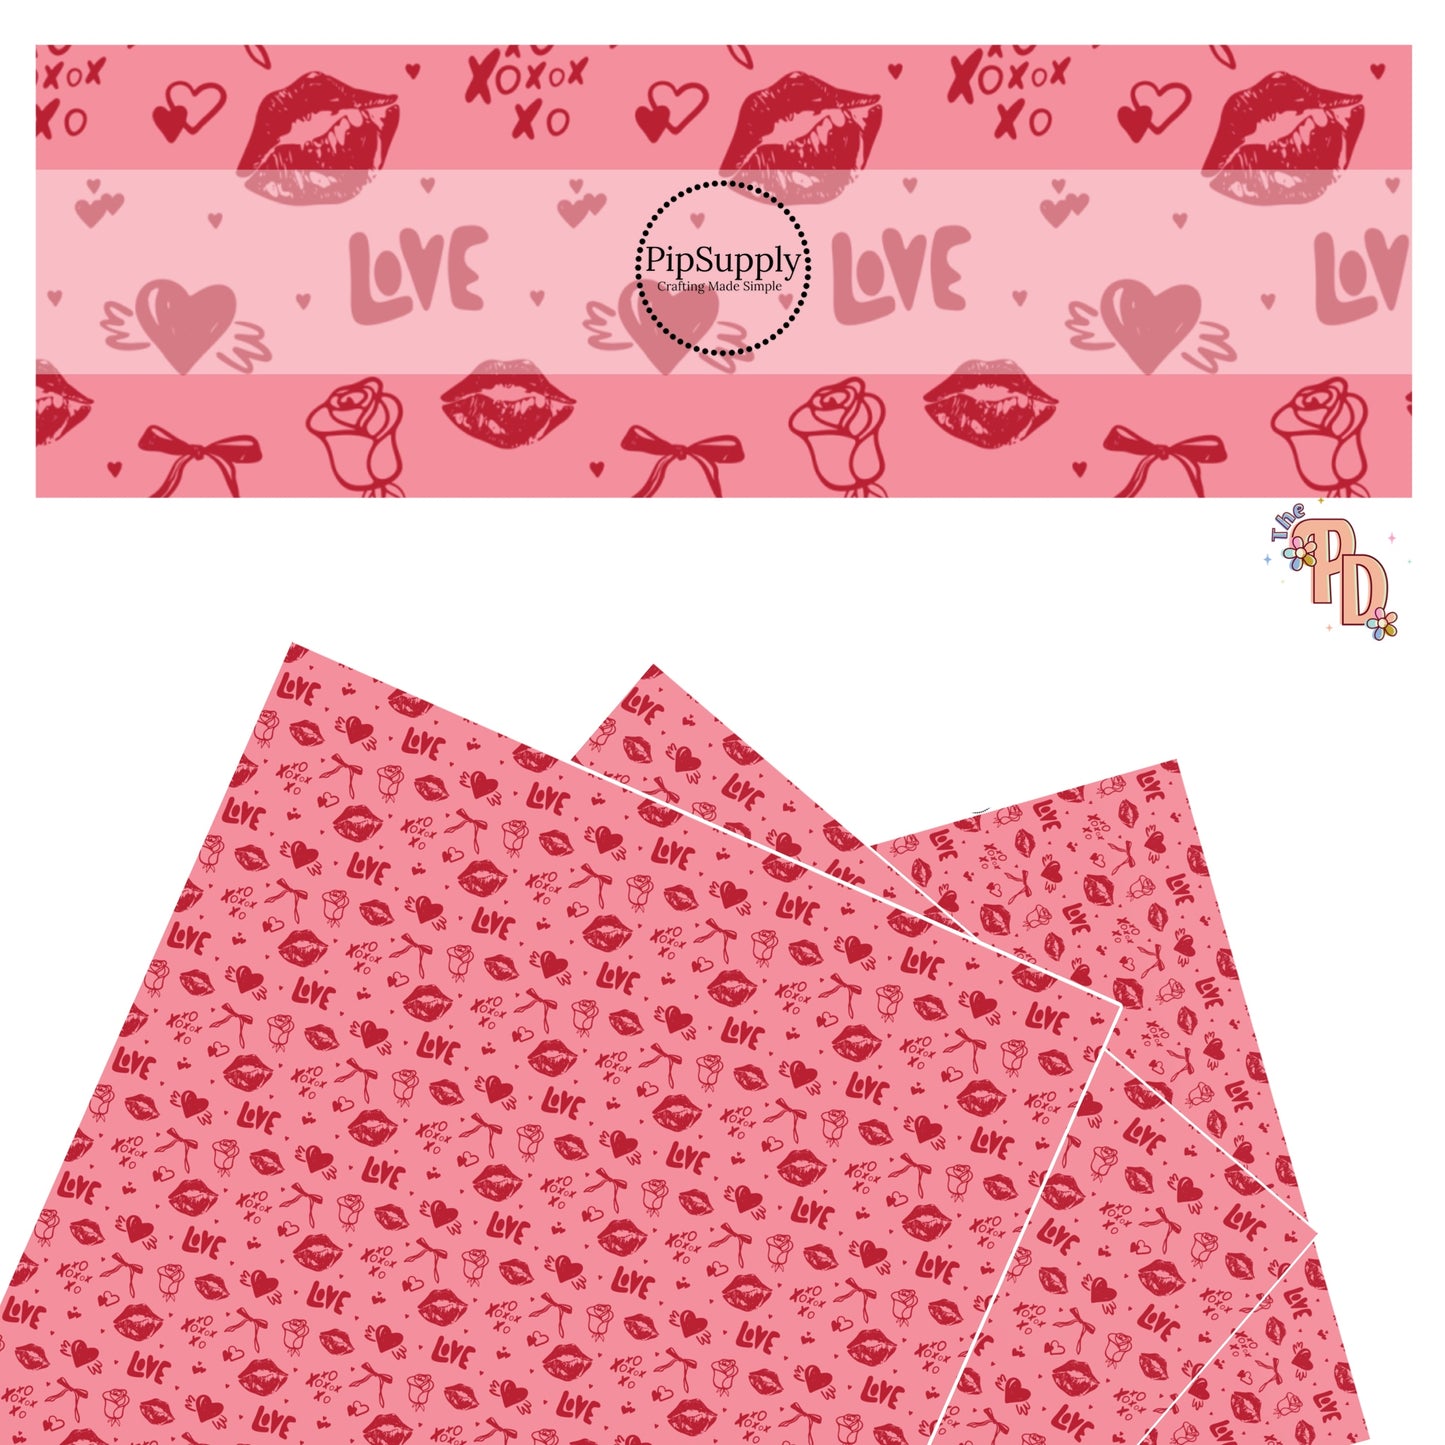 These Valentine's pattern themed faux leather sheets contain the following design elements: red kisses, bows, hearts, and Valentine sayings on pink. Our CPSIA compliant faux leather sheets or rolls can be used for all types of crafting projects.